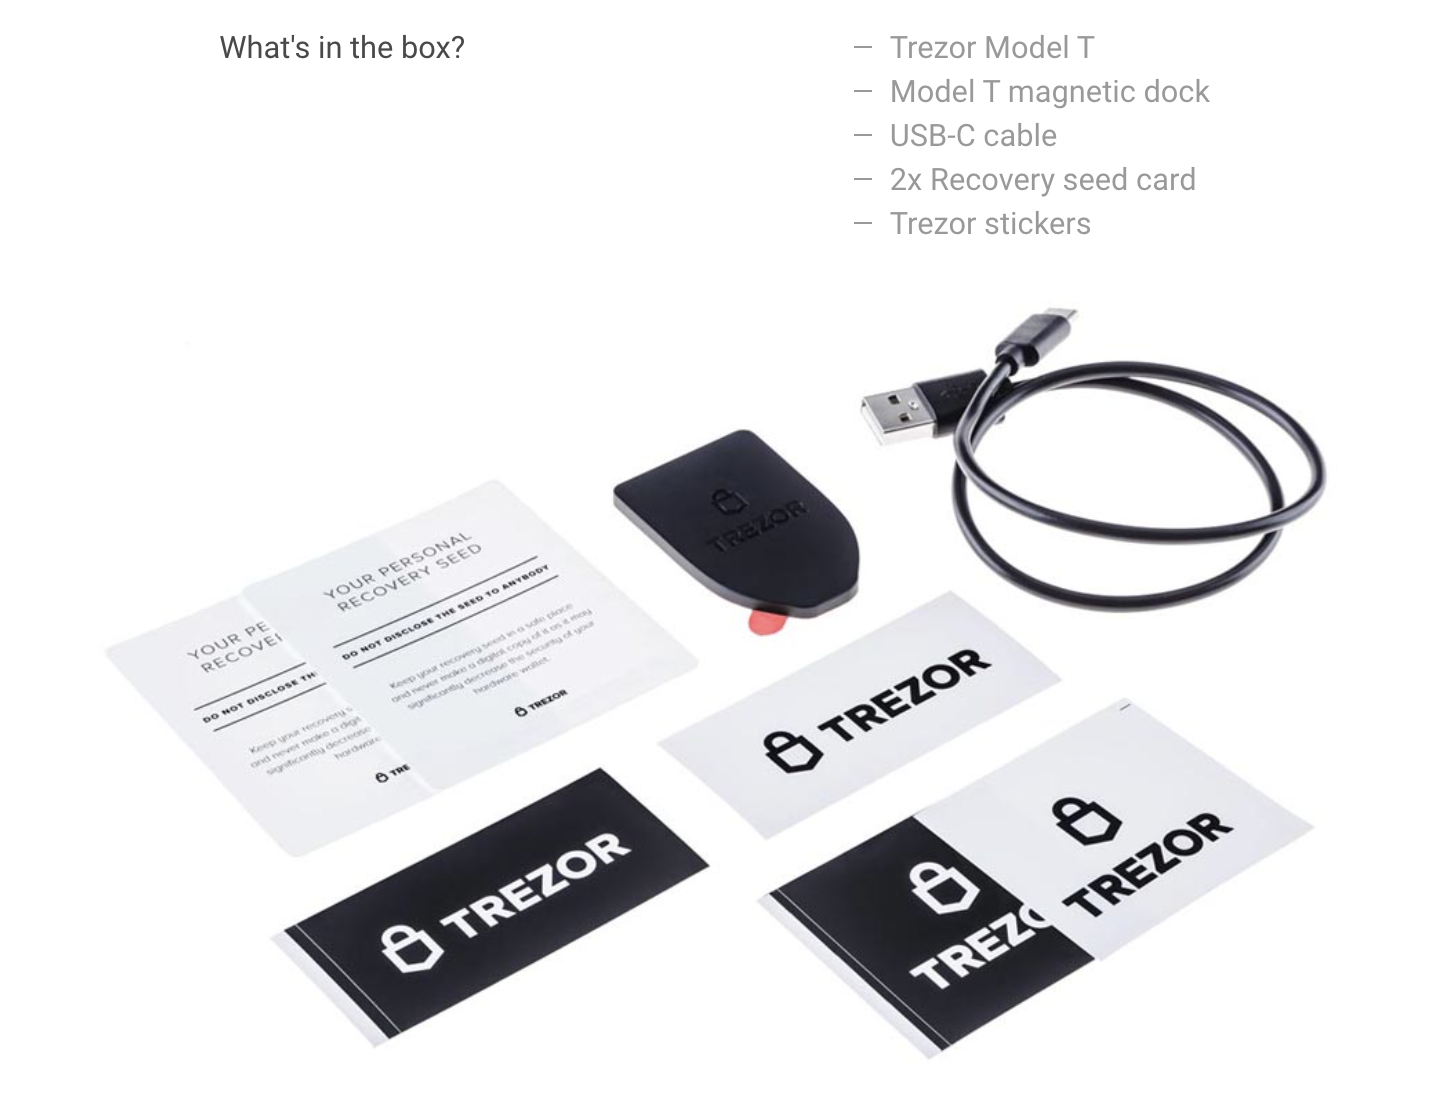 How To Recover Trezor Using Seed | CitizenSide